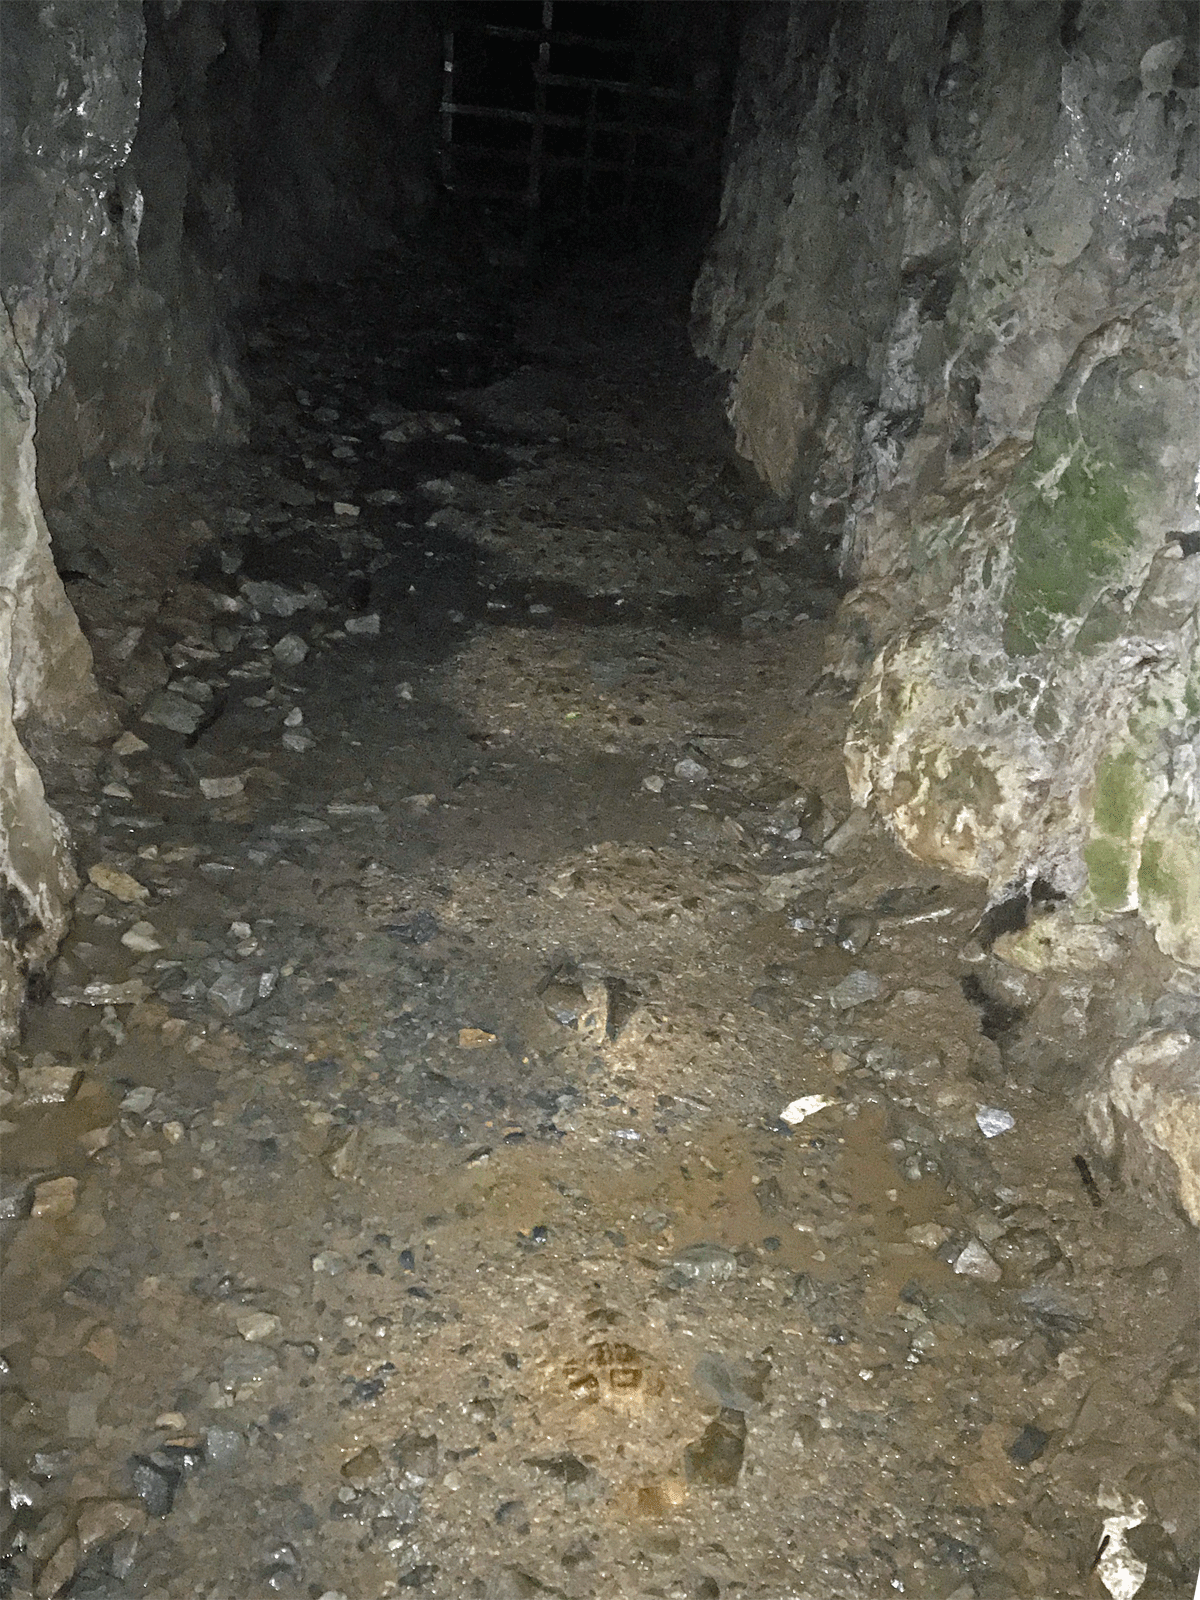 Floor of the Silver King Mine in Oregon